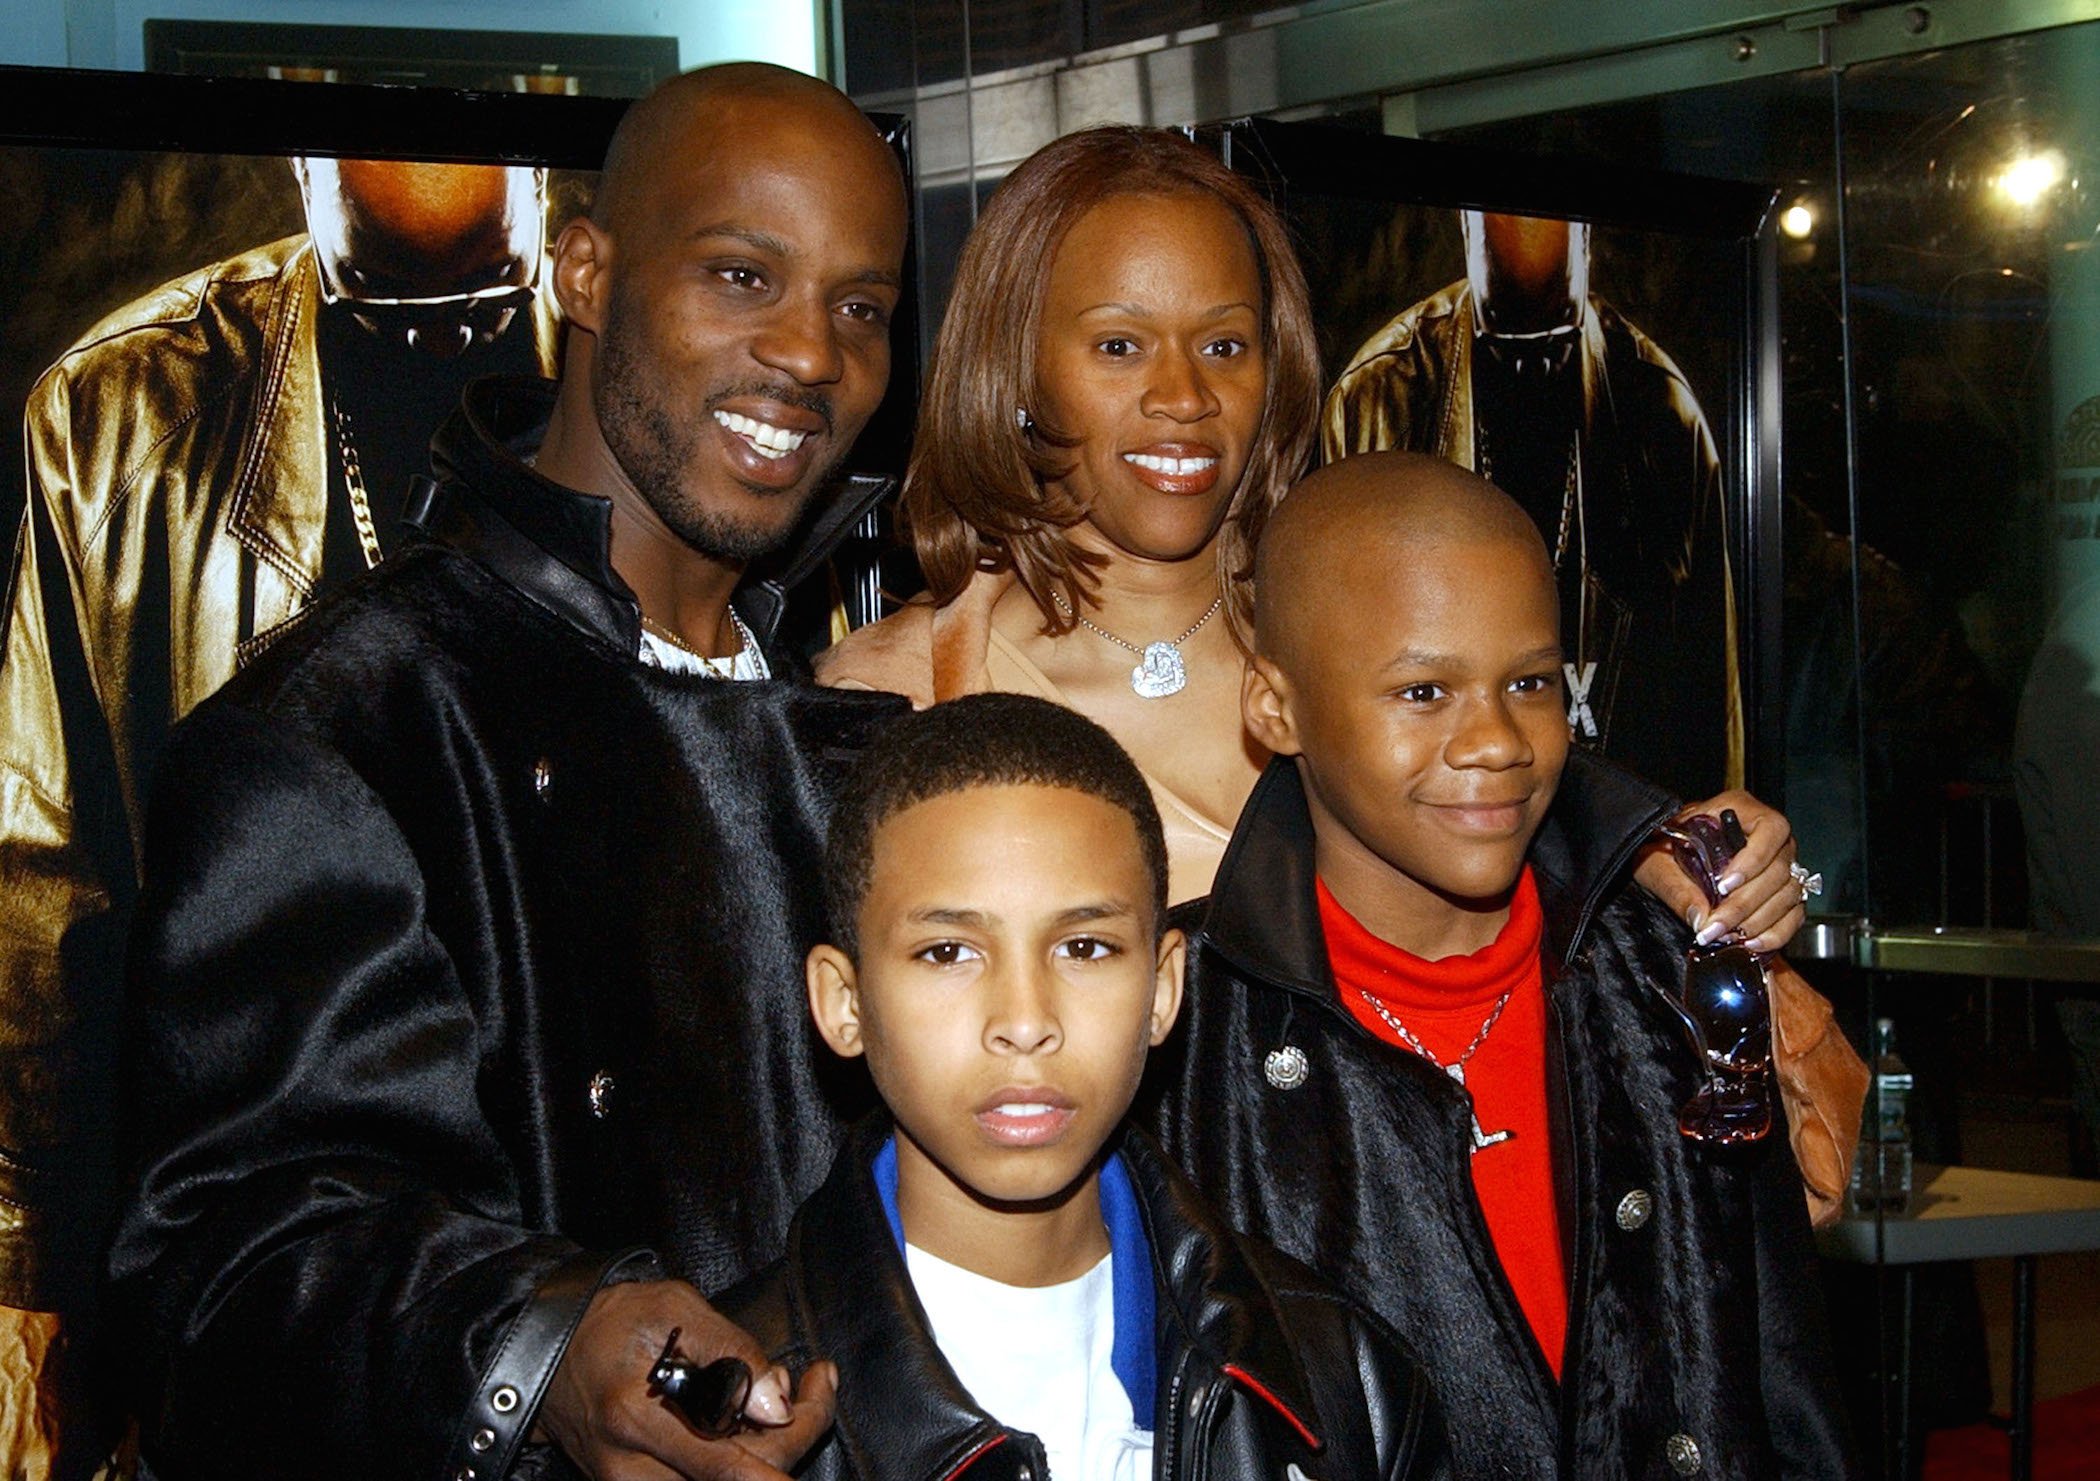 DMX's wife, Tashera Simmons, godson Jevon, and son Xavier, and DMX standing together at an event 